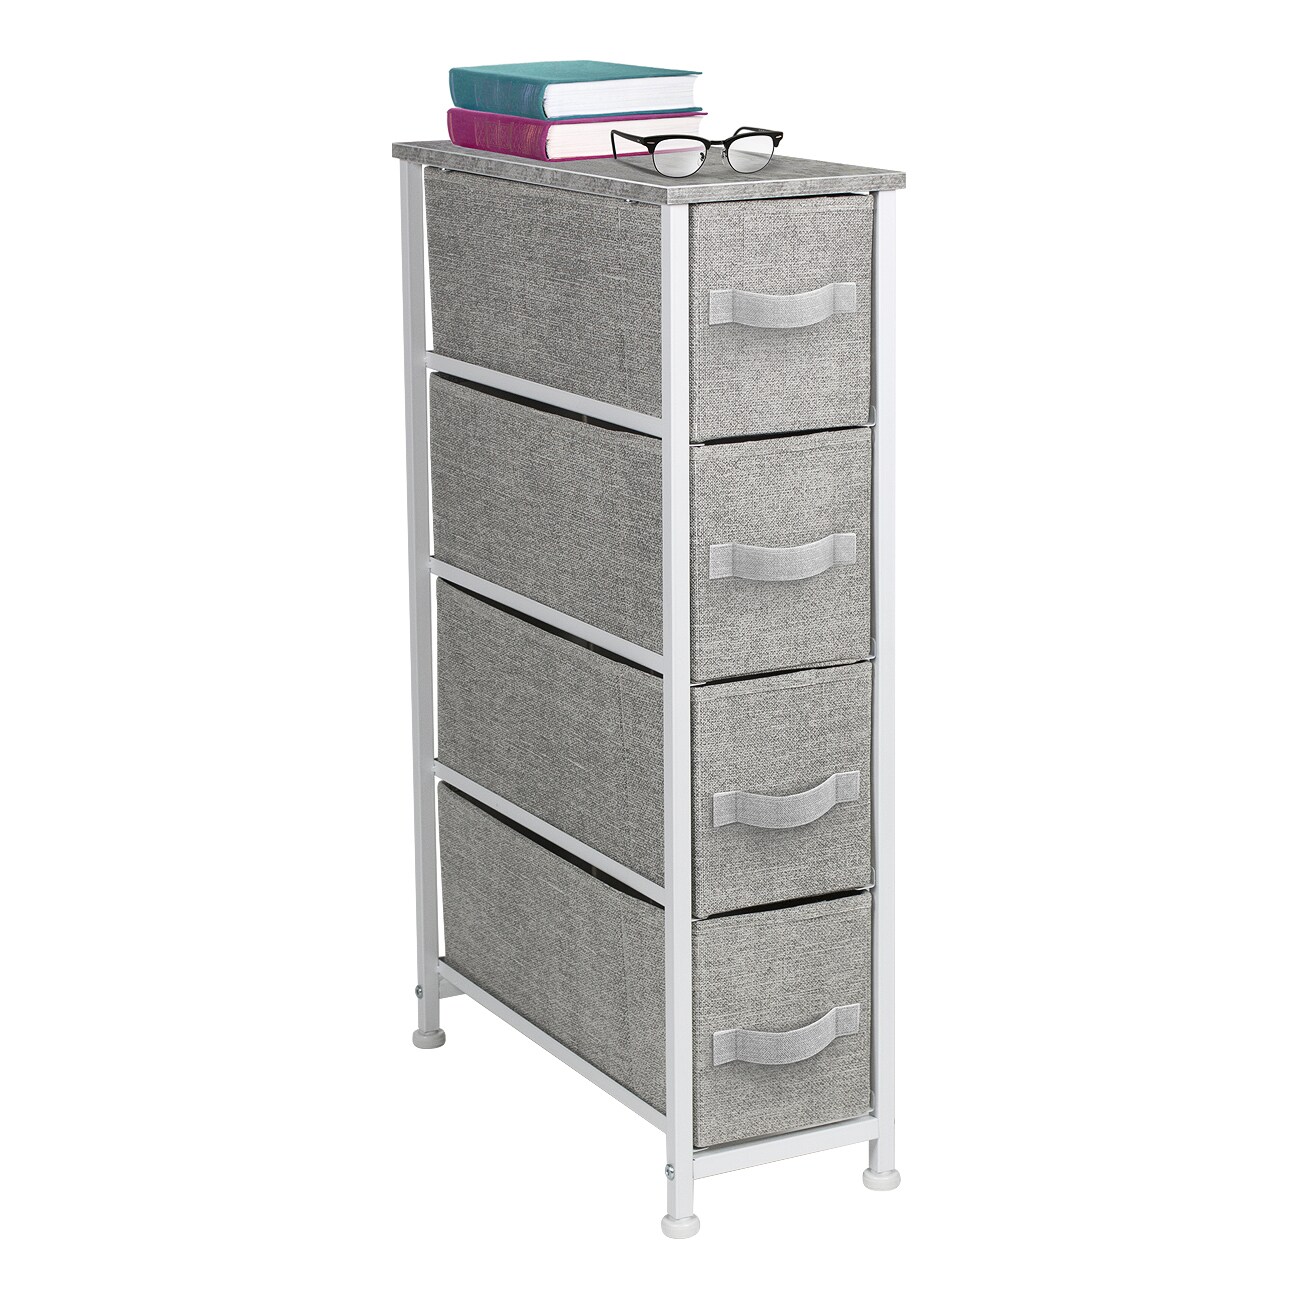 Sorbus 4 Drawers Narrow Dresser - with Steel Frame, Wood Top &#x26; Easy Pull Fabric Bins for Small Spaces, Closets, Bedroom, Bathroom &#x26; Laundry